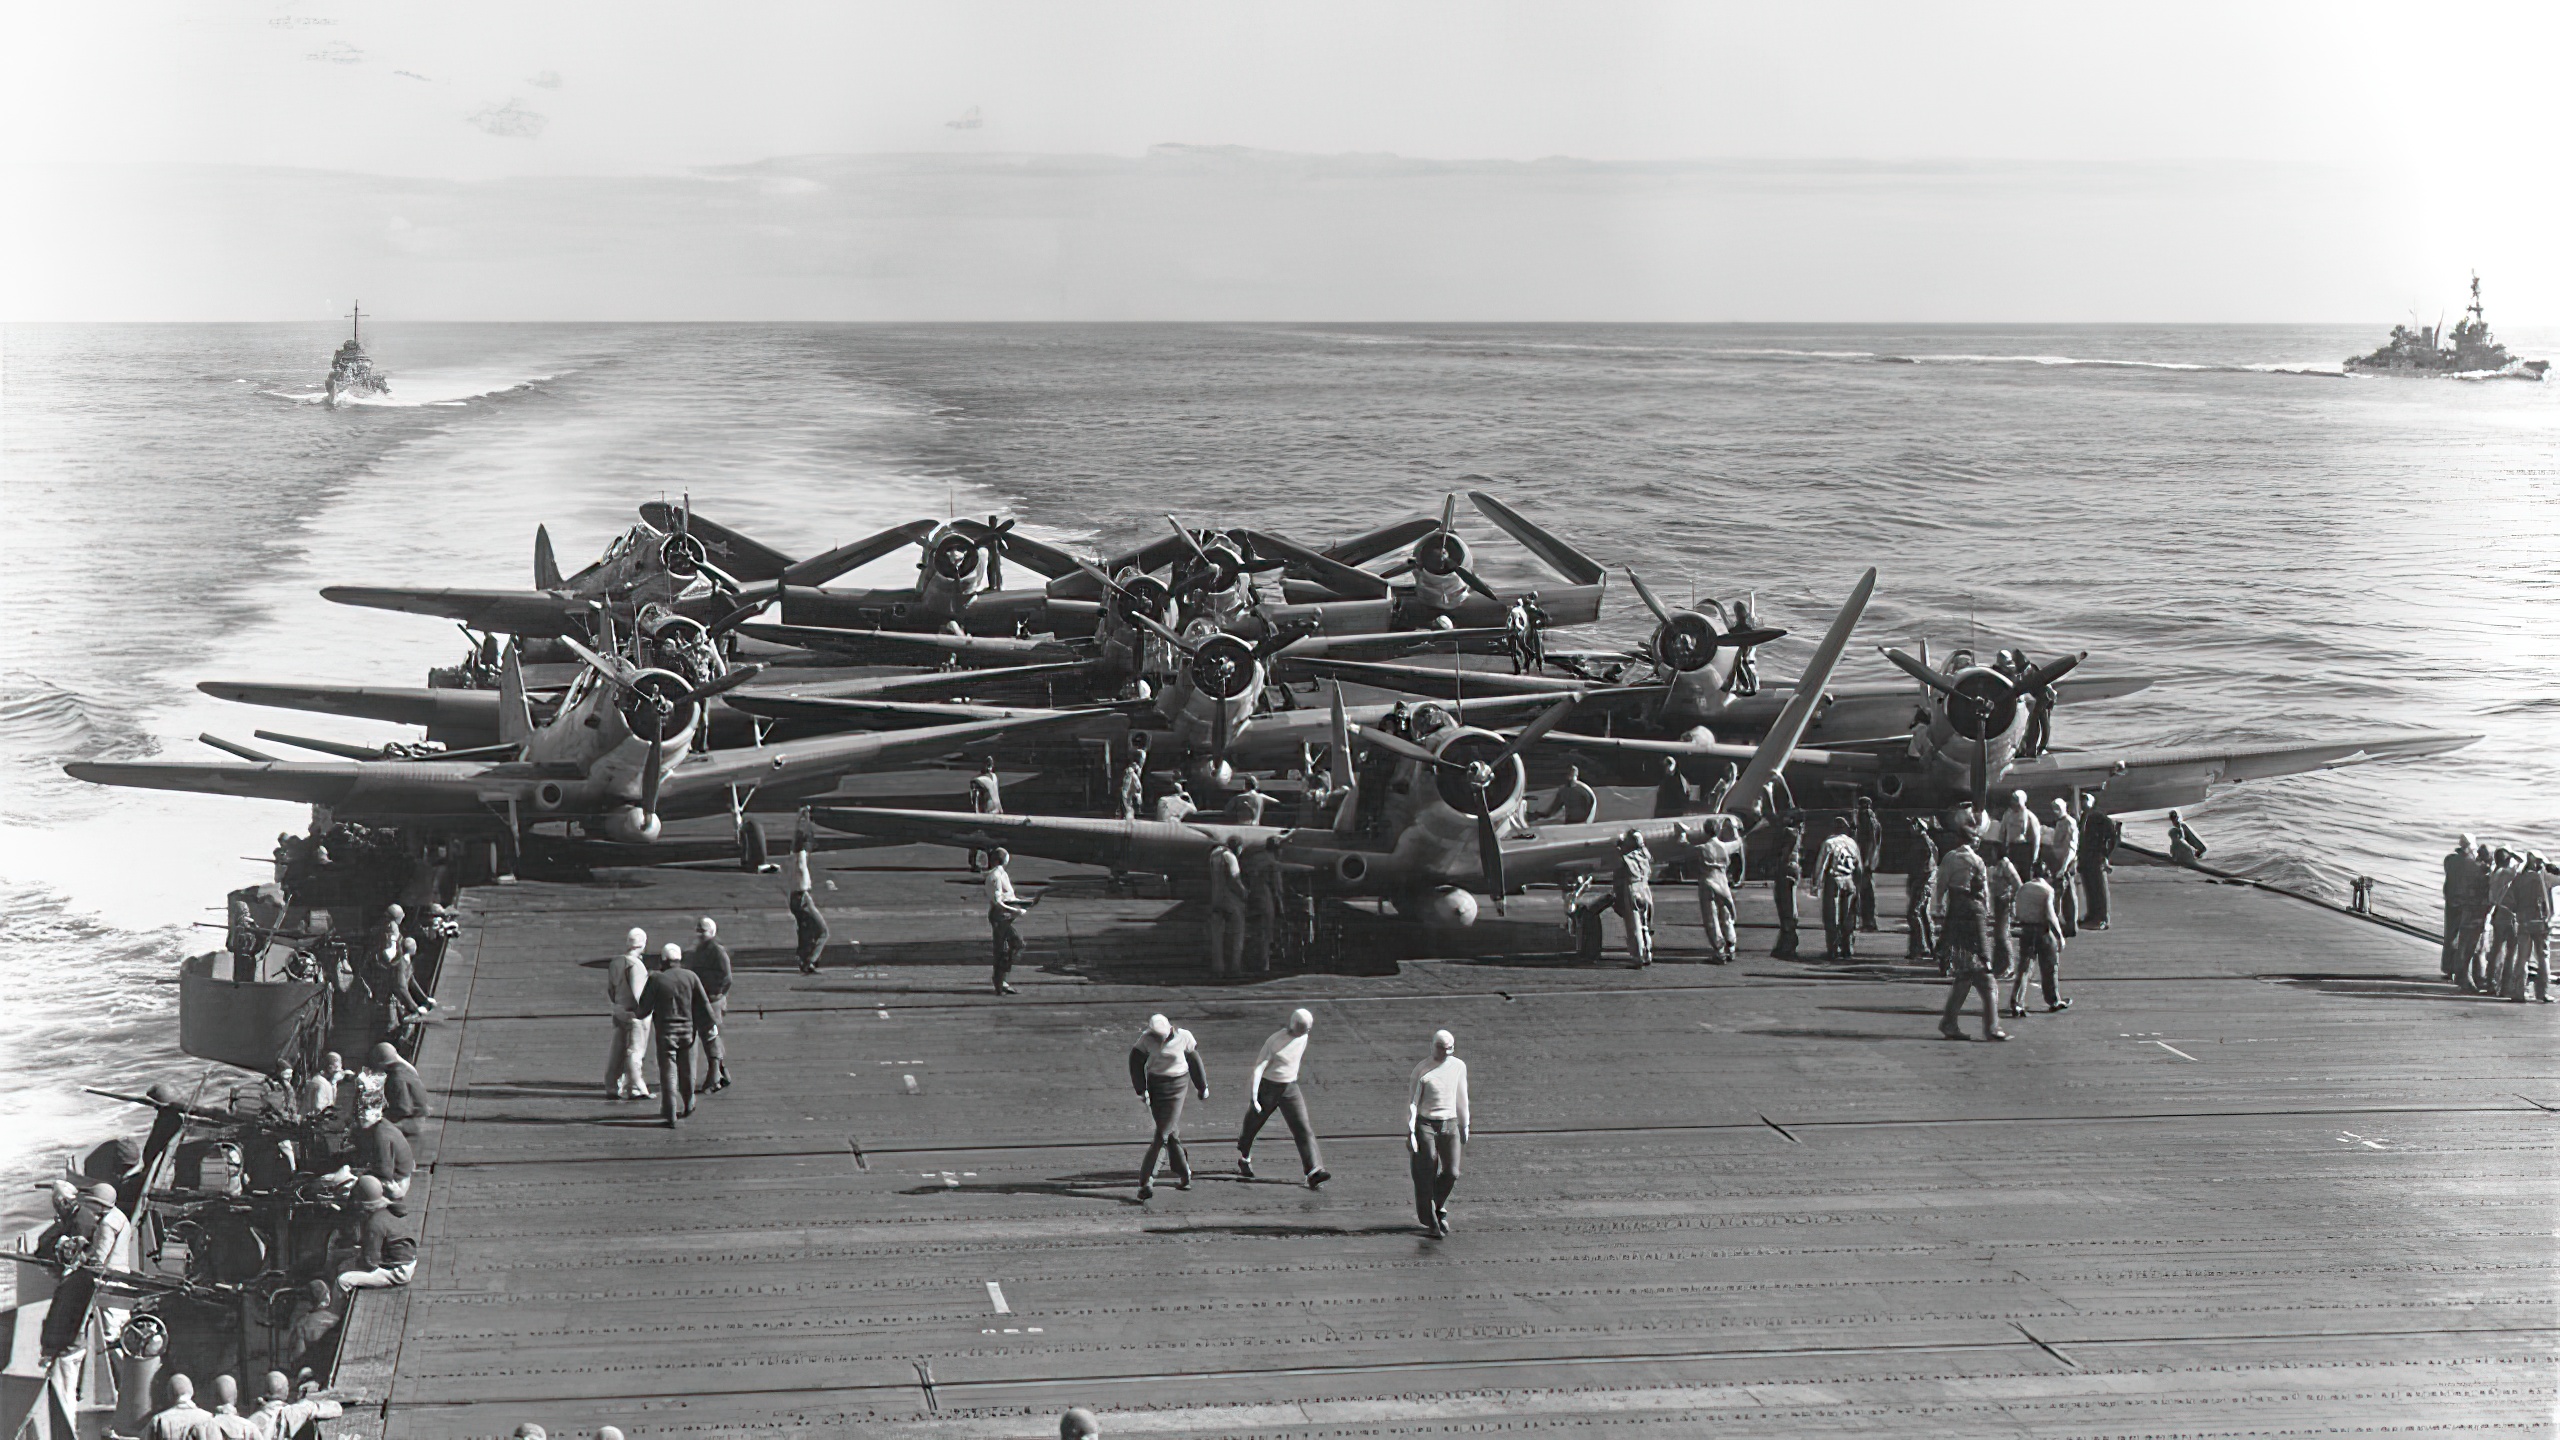 U.S. Navy Torpedo Squadron 6 (VT-6) Douglas TBD-1 Devastator aircraft are prepared for launching aboard the aircraft carrier USS Enterprise (CV-6) at about 0730-0740 hrs, 4 June 1942. Eleven of the fourteen TBDs launched from Enterprise are visible. Three more TBDs and ten Grumman F4F-4 Wildcat fighters must still be pushed into position before launching can begin